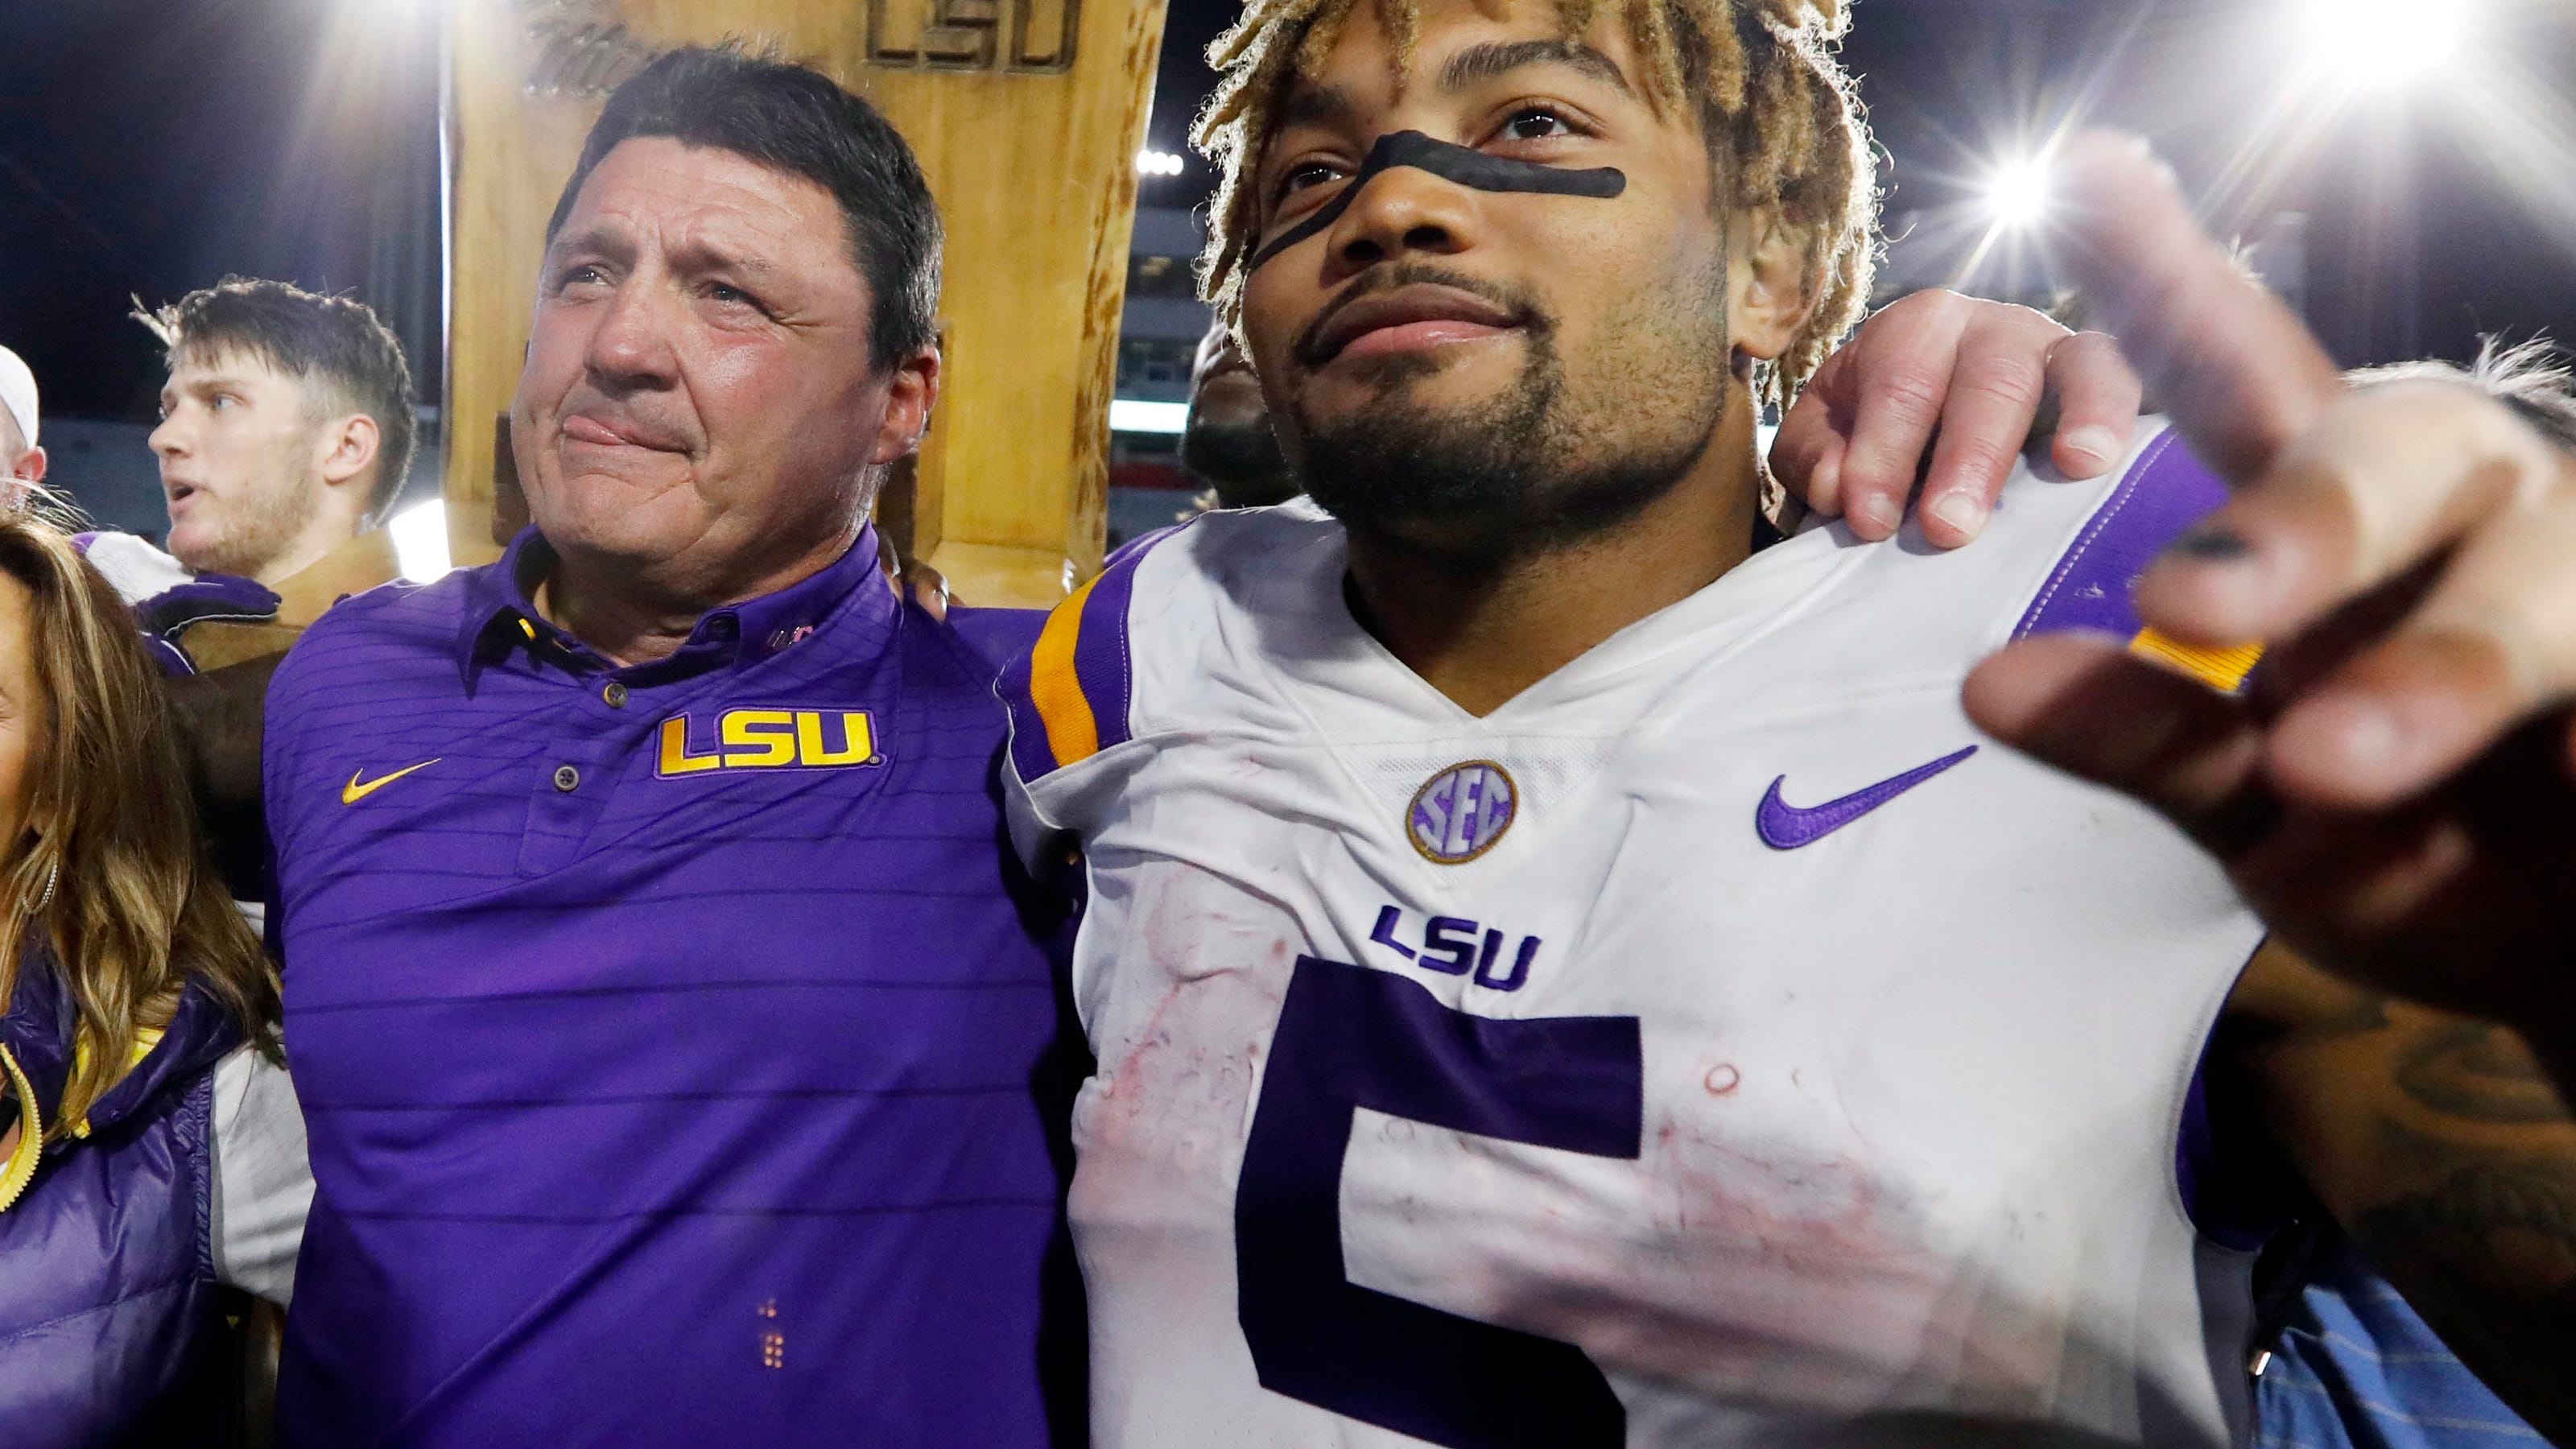 Lsu Reeling From Ongoing Reviews Of Sexual Misconduct Cases